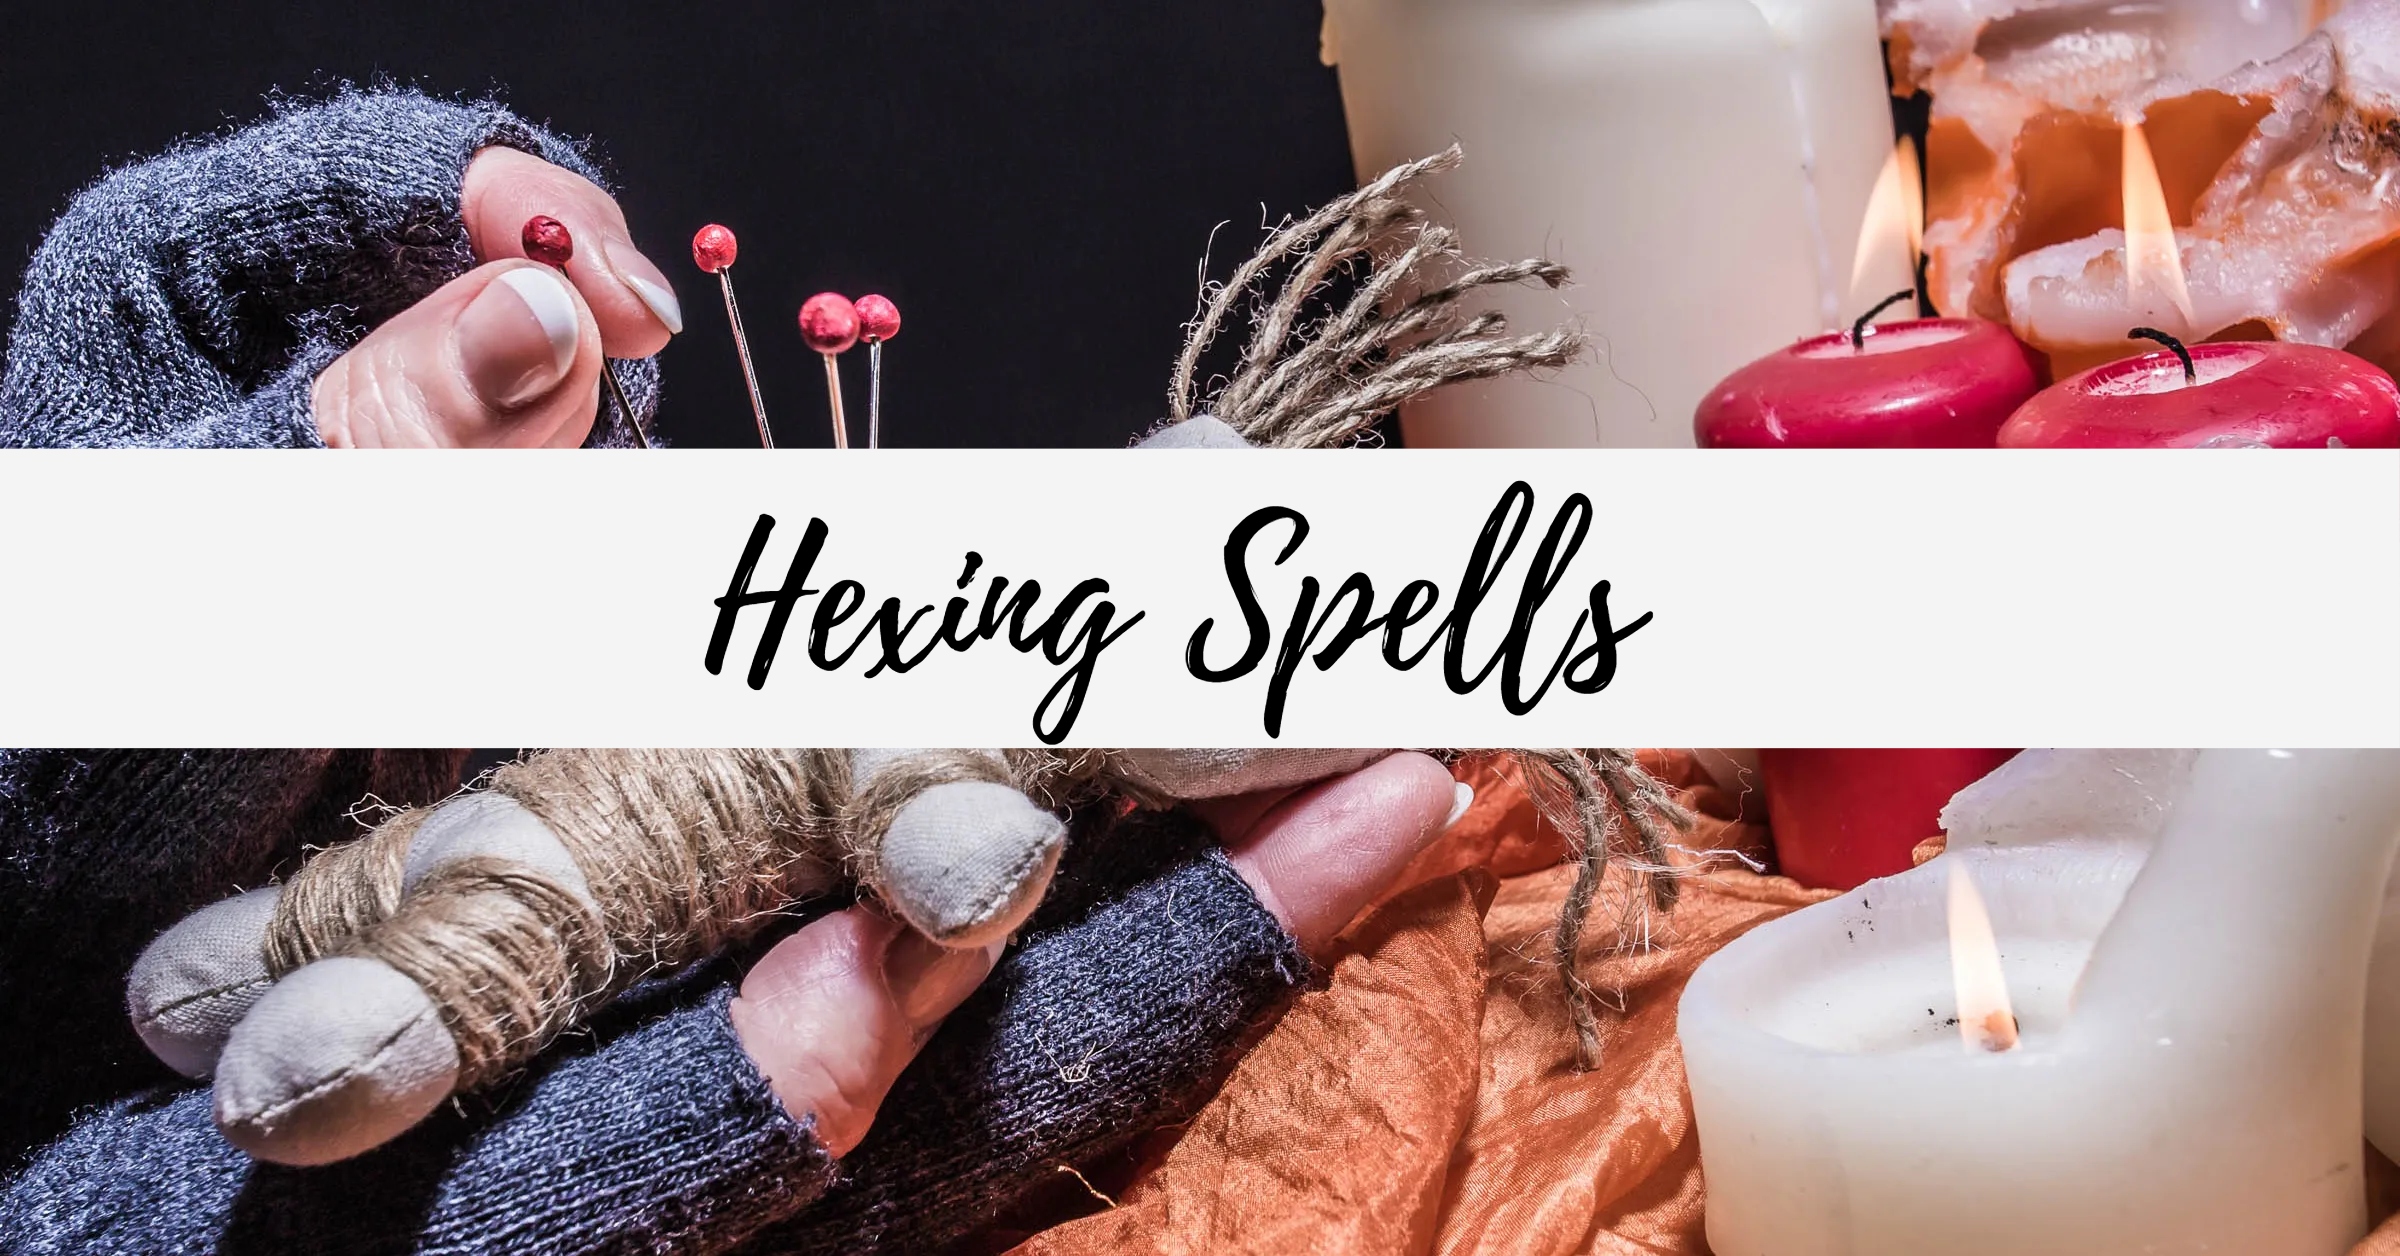 Hexing Spells - A Magic Spell That's Meant To Cause Harm